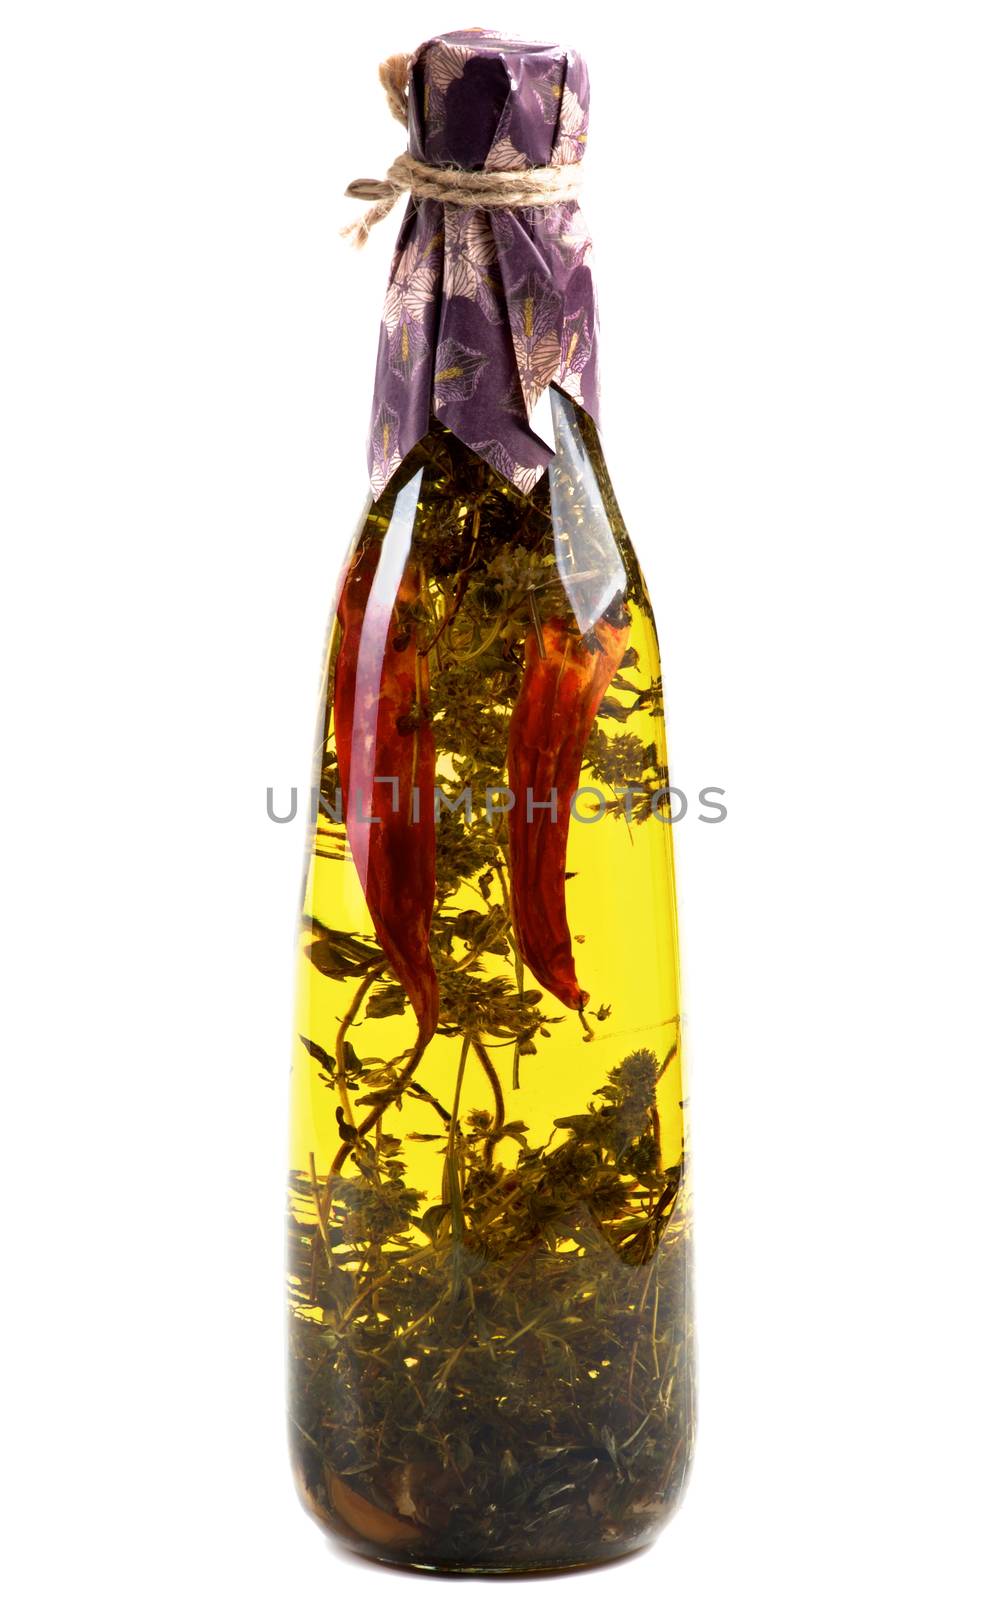 Olive Oil with Chili Pepper and Herbs by zhekos